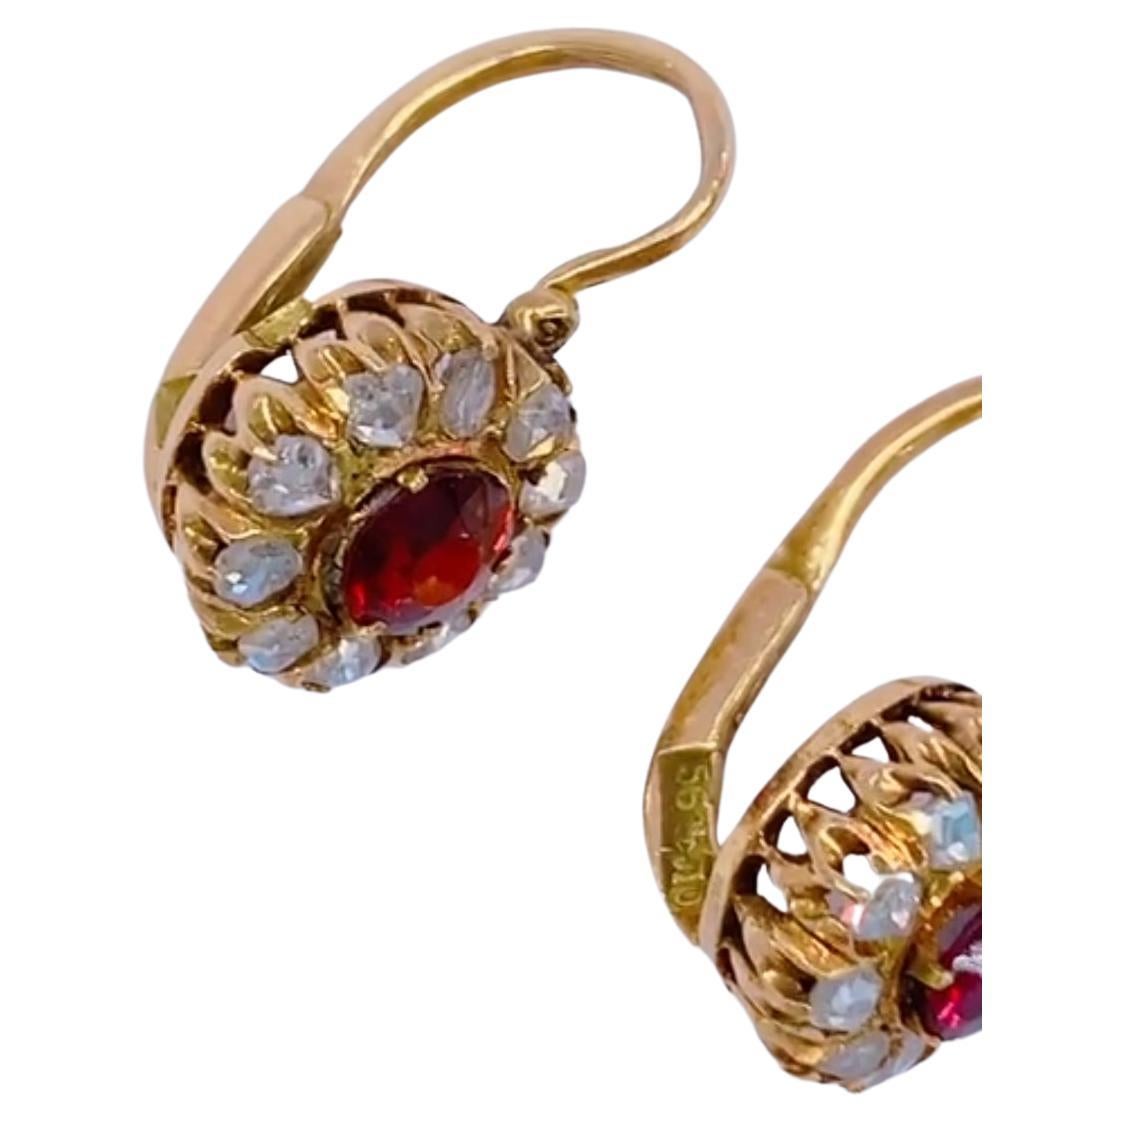 Antique imperial Russian era 1880s Garnet 14k gold earring centered with 2 round cut Garnet flanked with rose cut diamonds with an earrings head diameter 5.25mm made in Moscow 1880/1890.c hall marked with Moscow assay mark st George slaying the